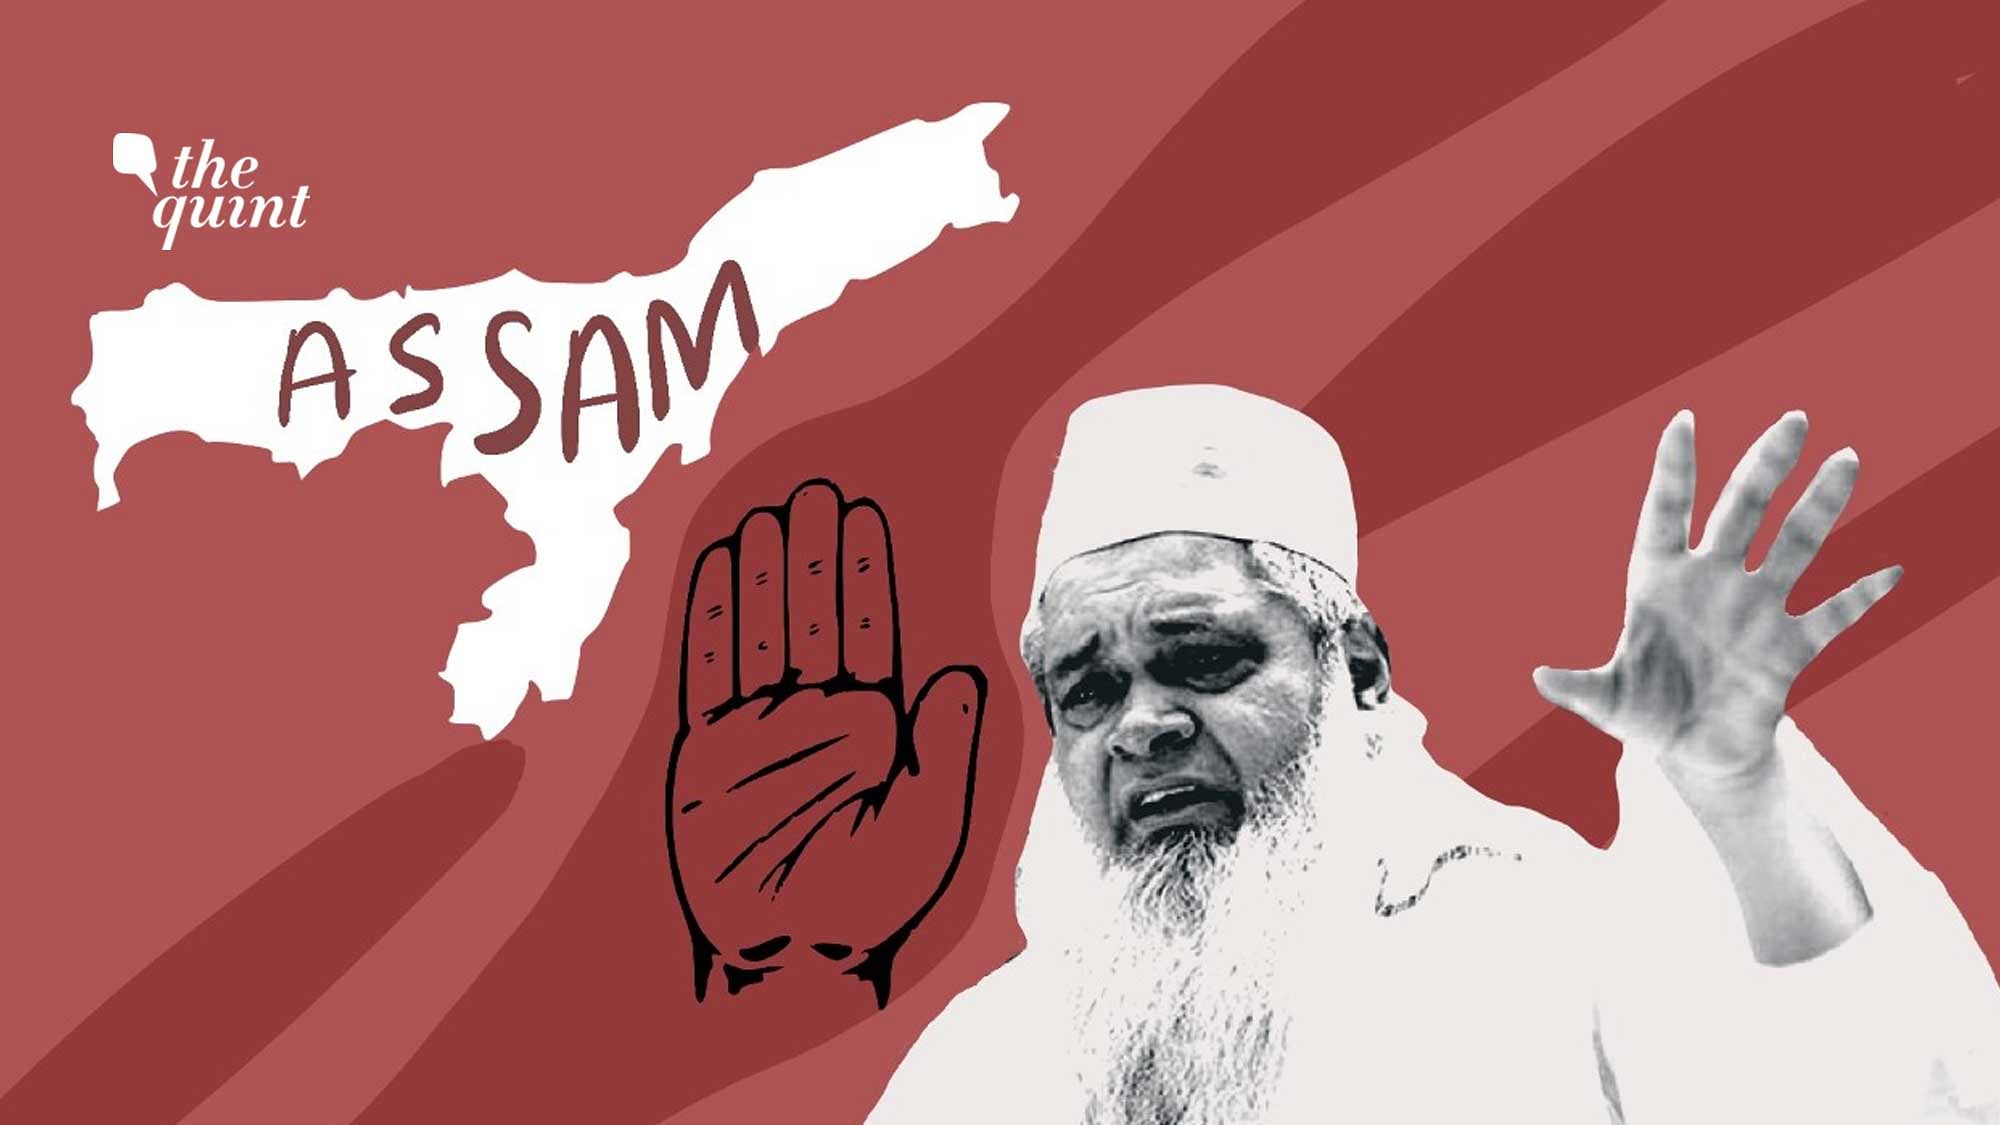  Image of Congress party’s hand symbol, and image of AIUDF’s leader Badruddin Ajmal used for representational purposes.